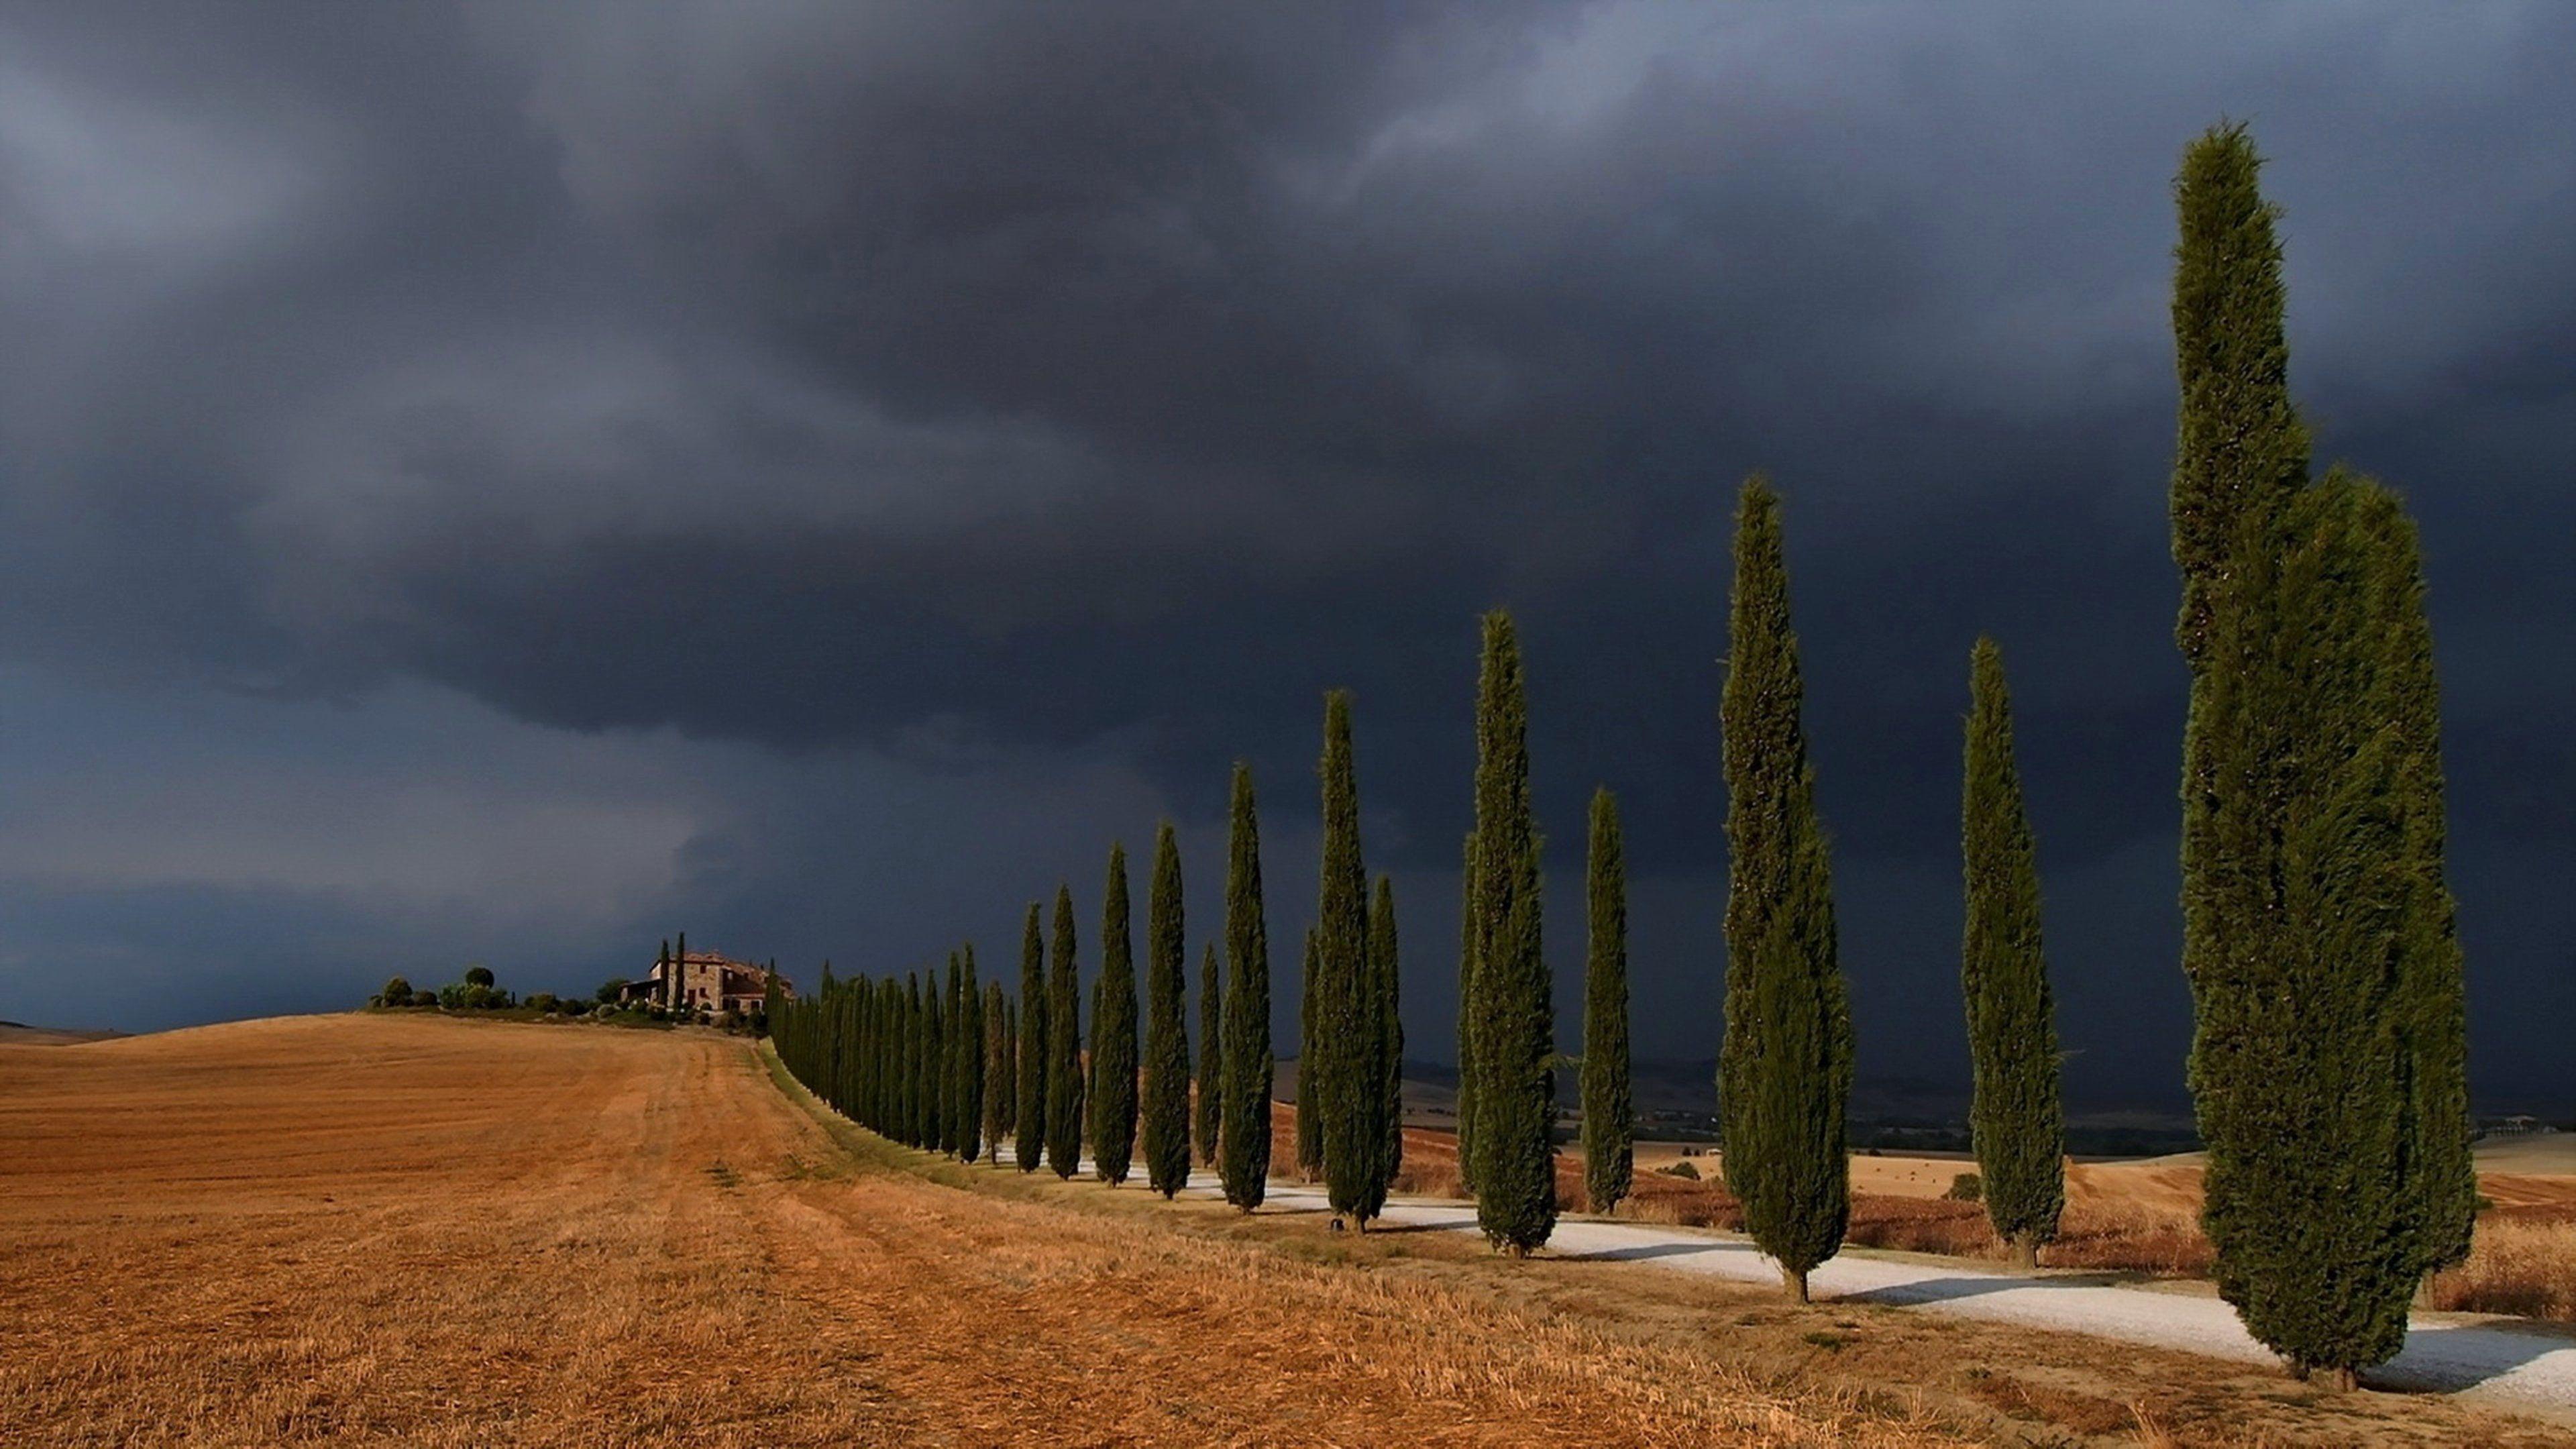 Storm Val d&;orcia trees road sky landscape nature fields